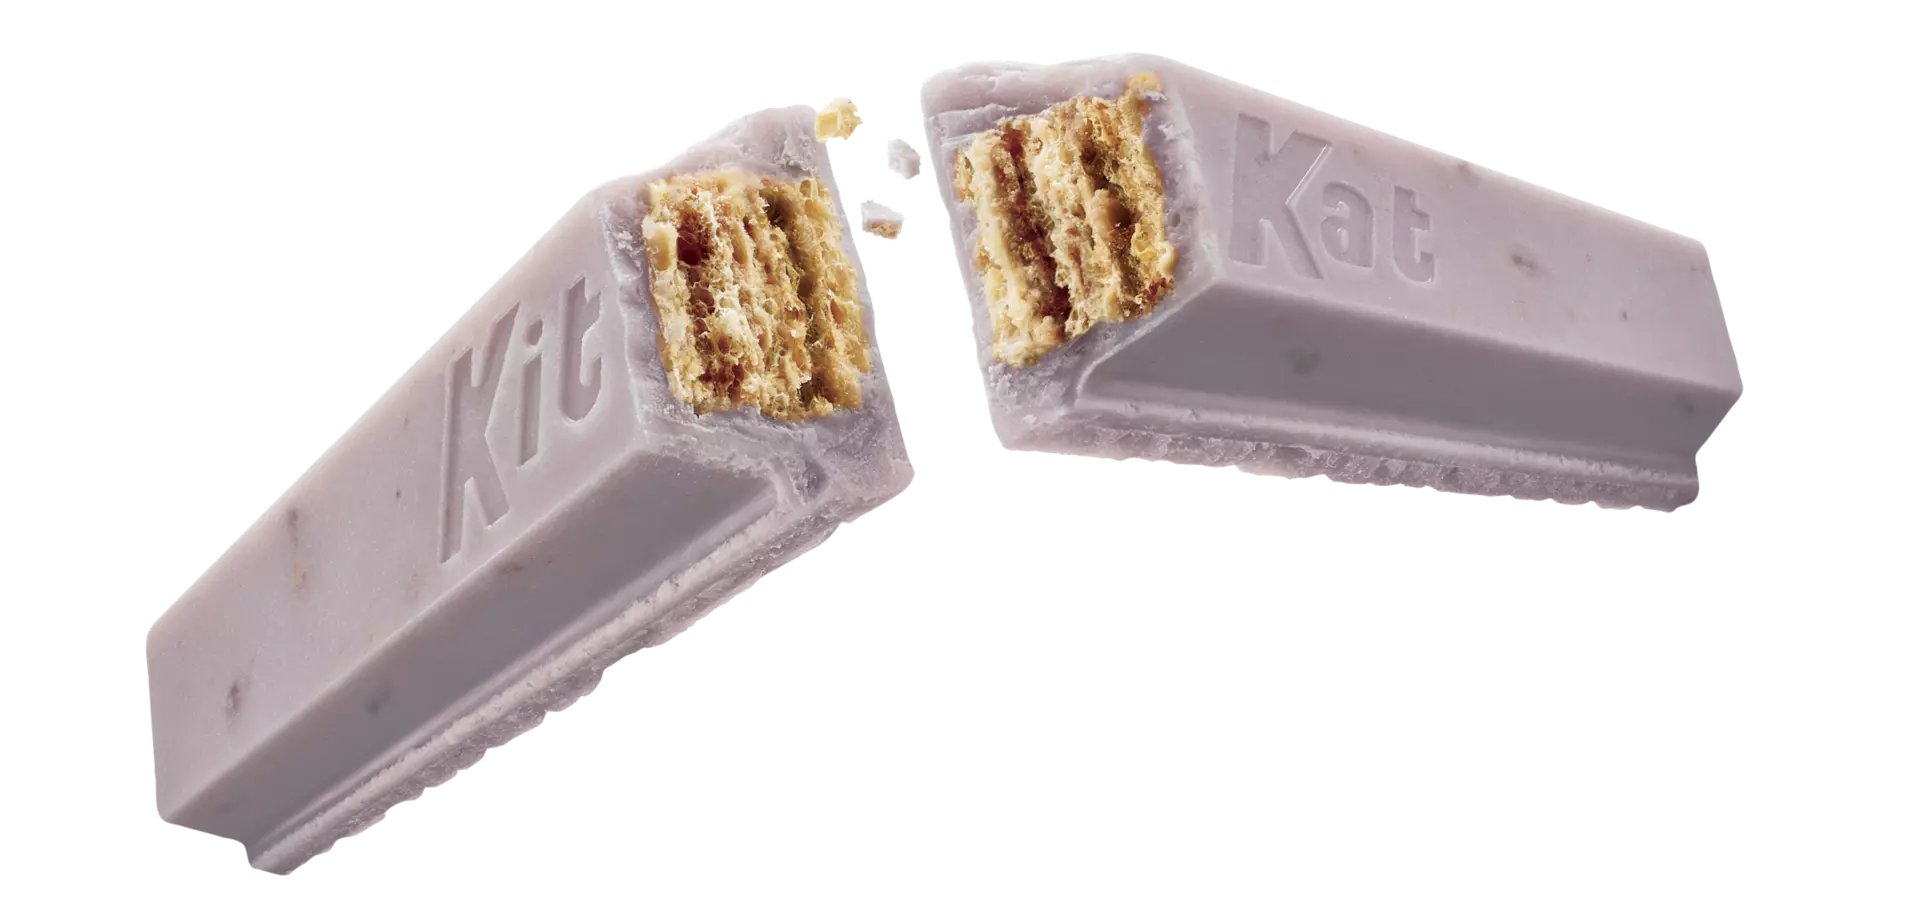 KIT KAT® Blueberry Muffin Candy Bar, 1.5 oz - Out of Package